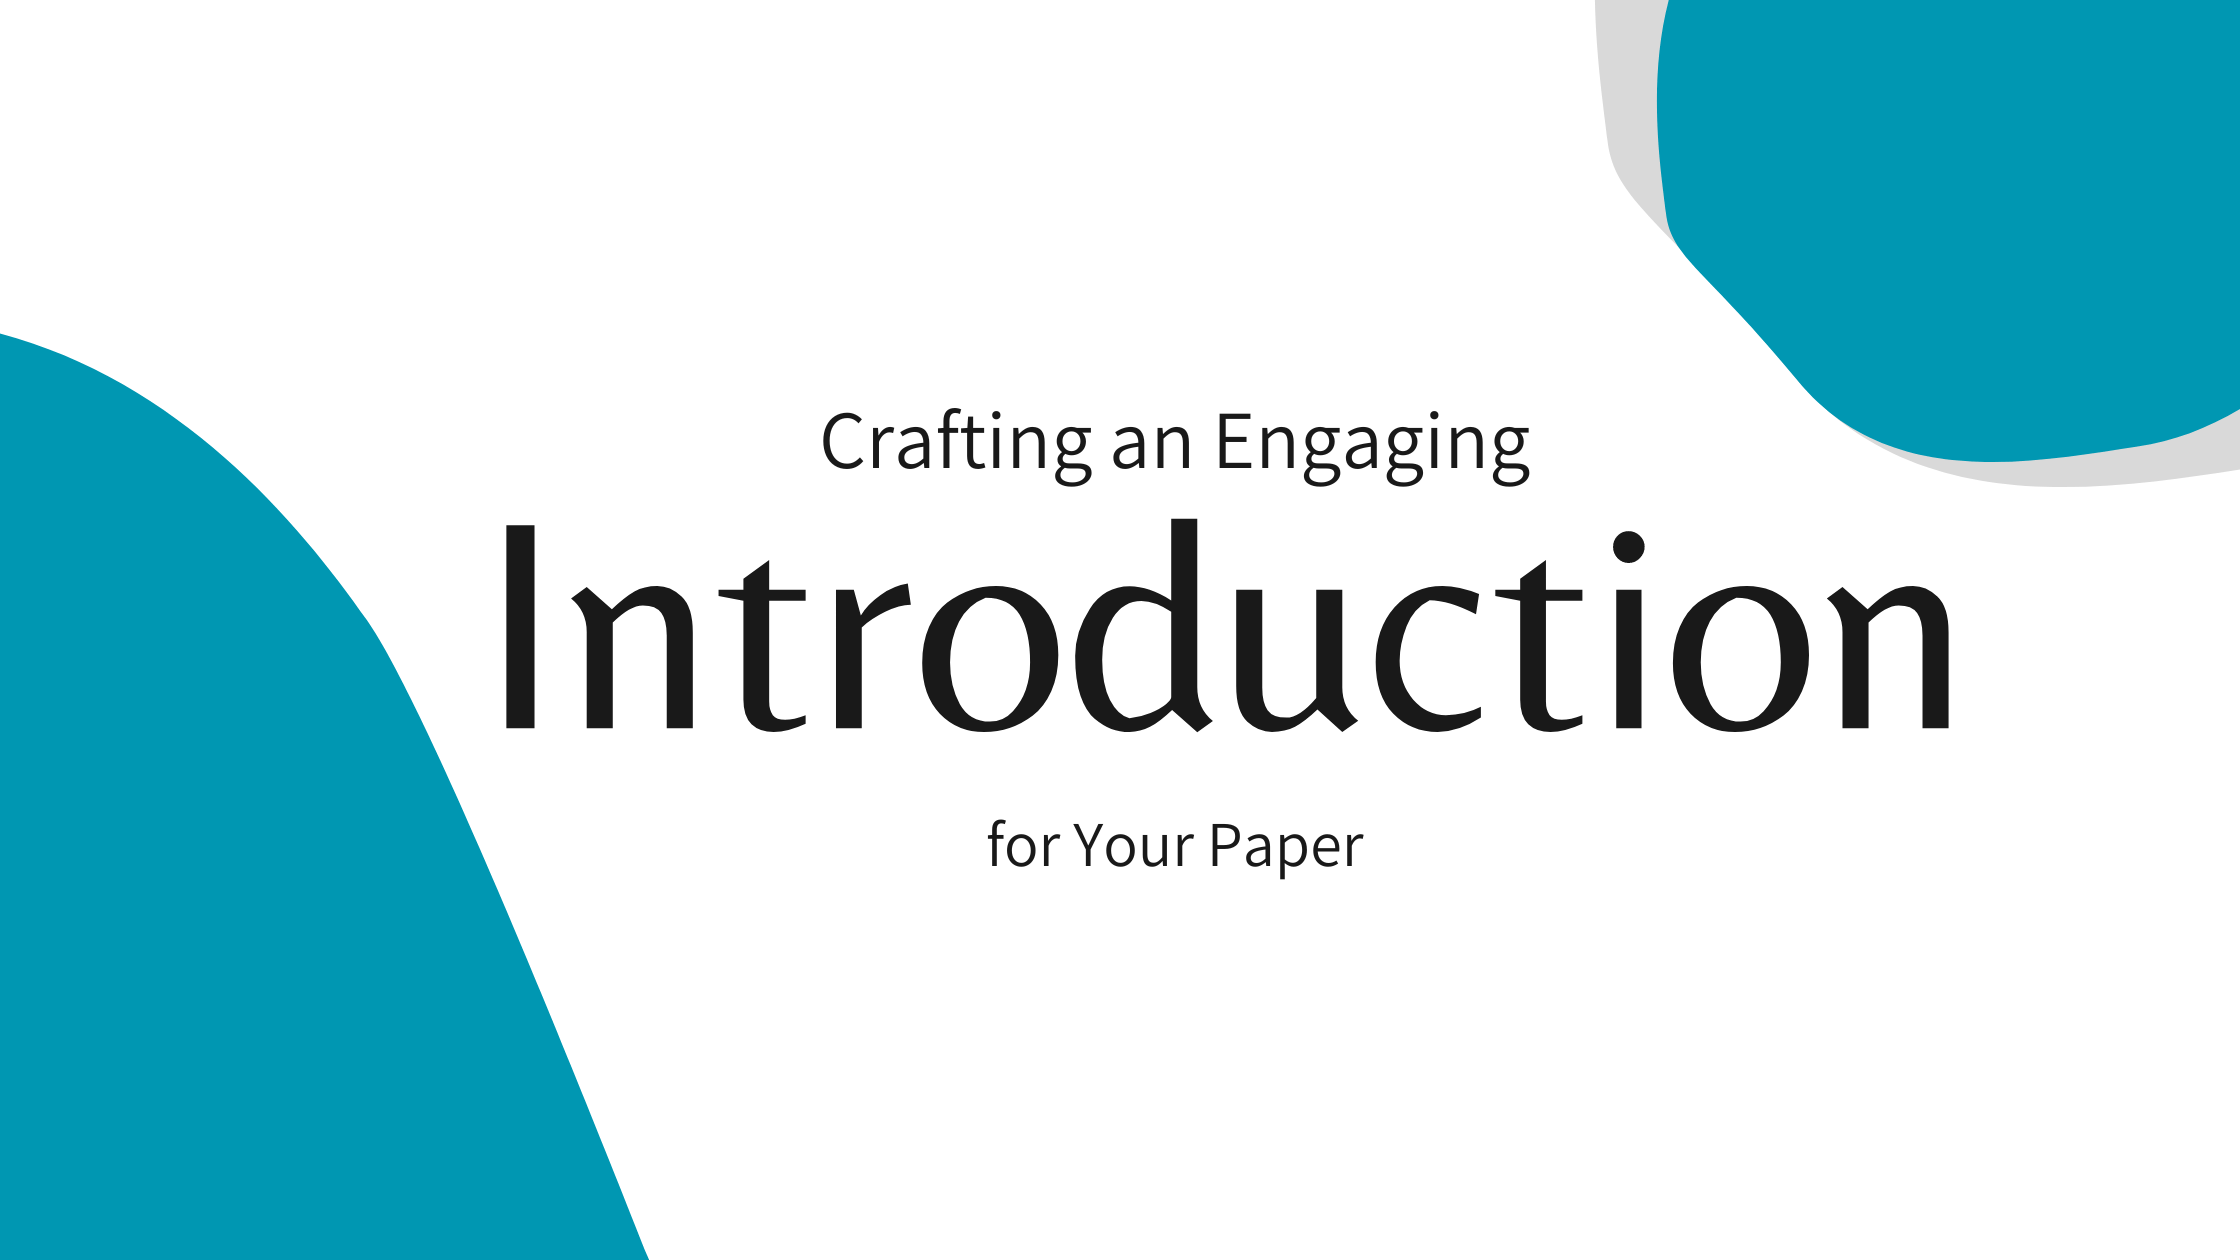 Crafting an Engaging Introduction for Your Paper